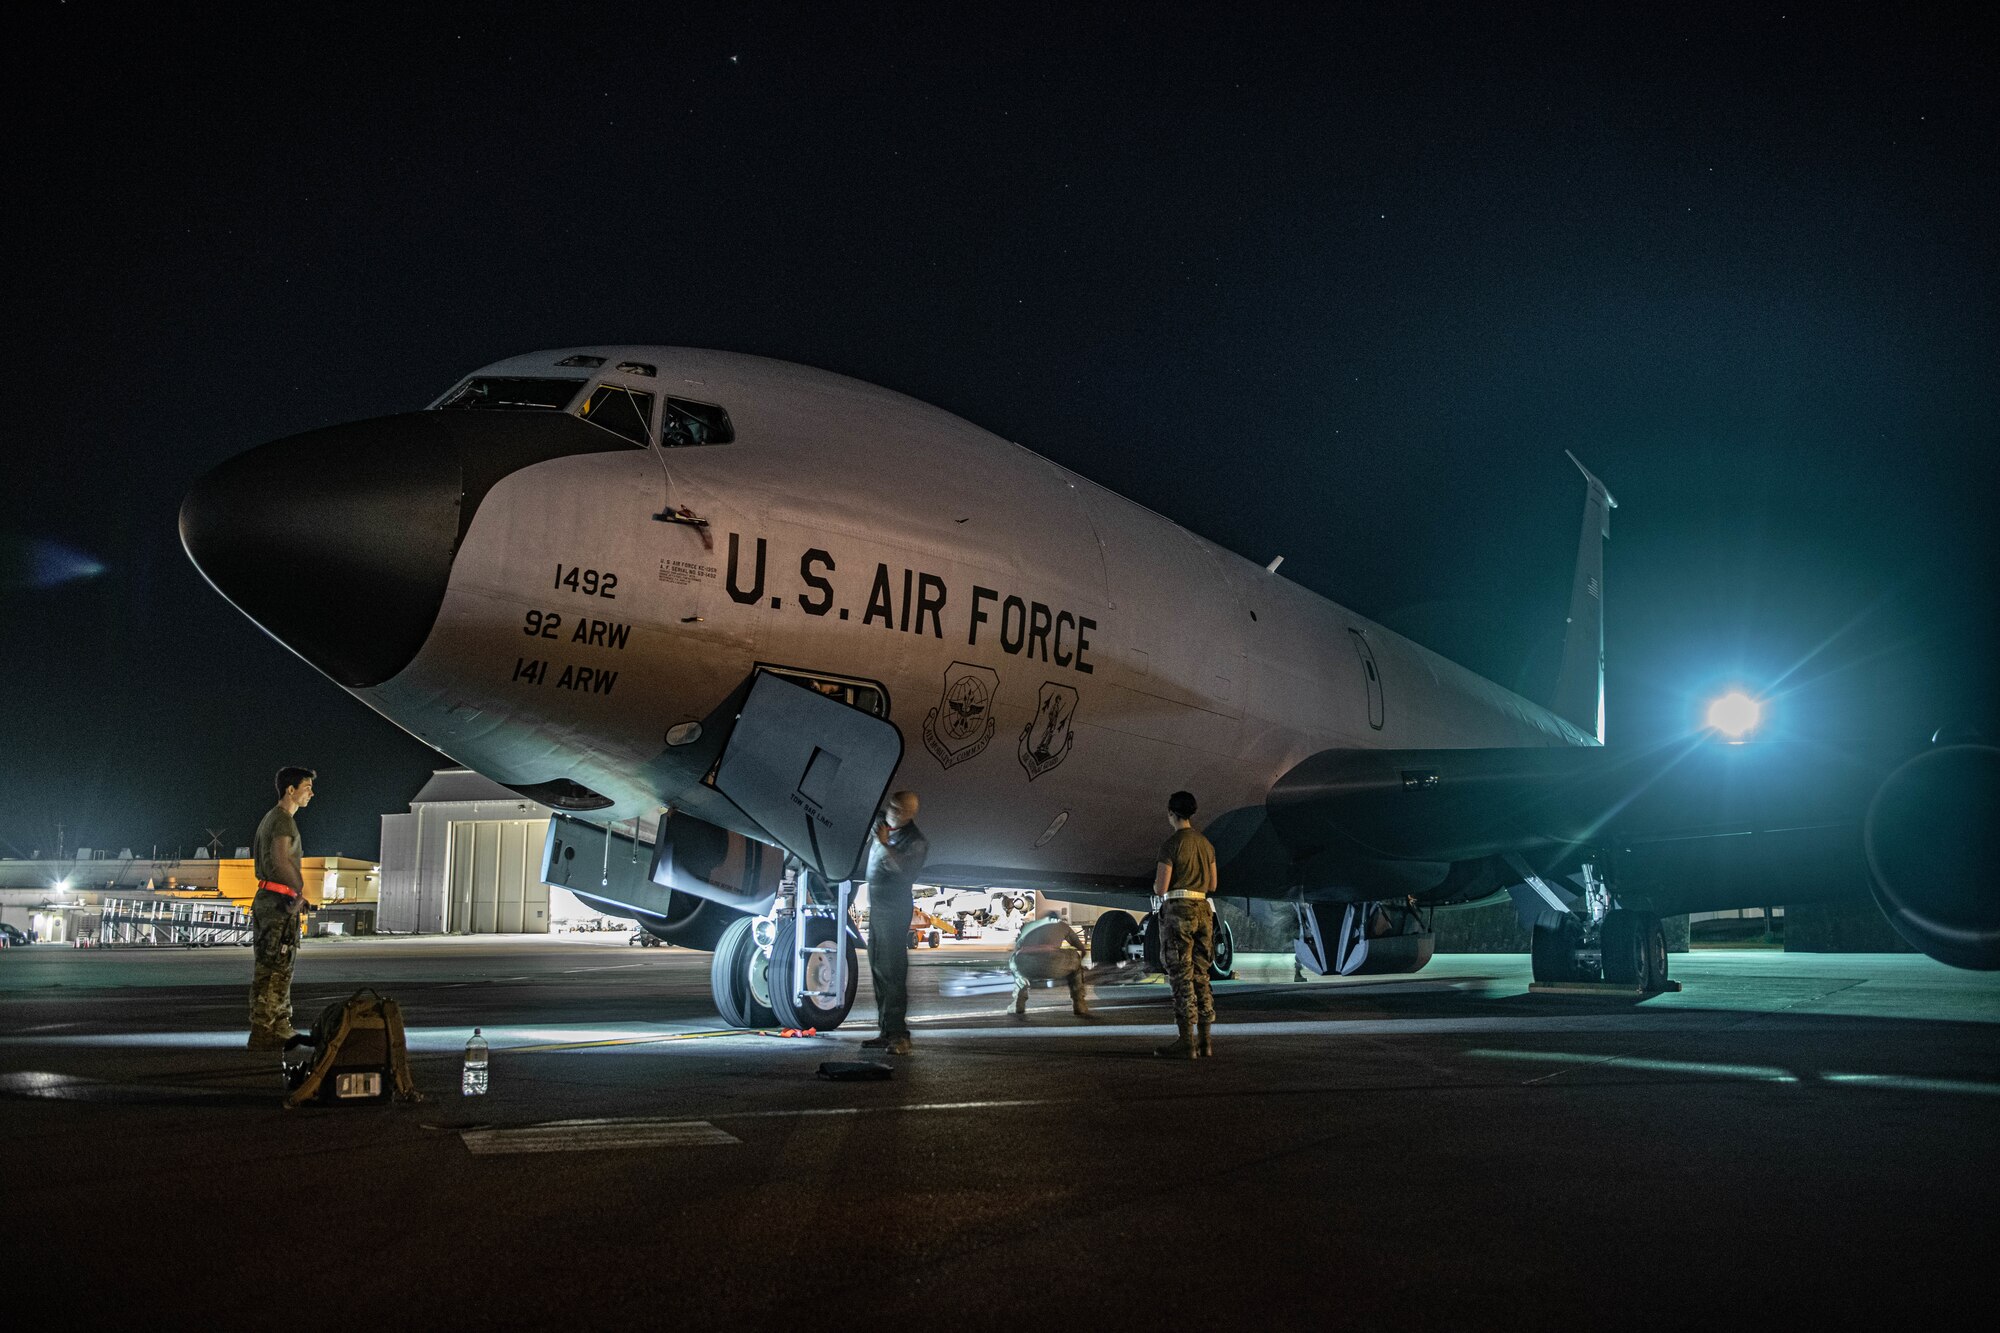 Airmen from the 909th Air Refueling Squadron perform pre-flight checks on a KC-135 Stratotanker before a refueling mission at Kadena Air Base, Japan, Oct. 27, 2022. Kadena Air Base is the hub of airpower in the Pacific, and home to the 18th Wing and a variety of associate units to form a world-class combat team ready to ensure peace and stability across the Indo-Pacific. (U.S. Air Force photo by Airman Alexis Redin)